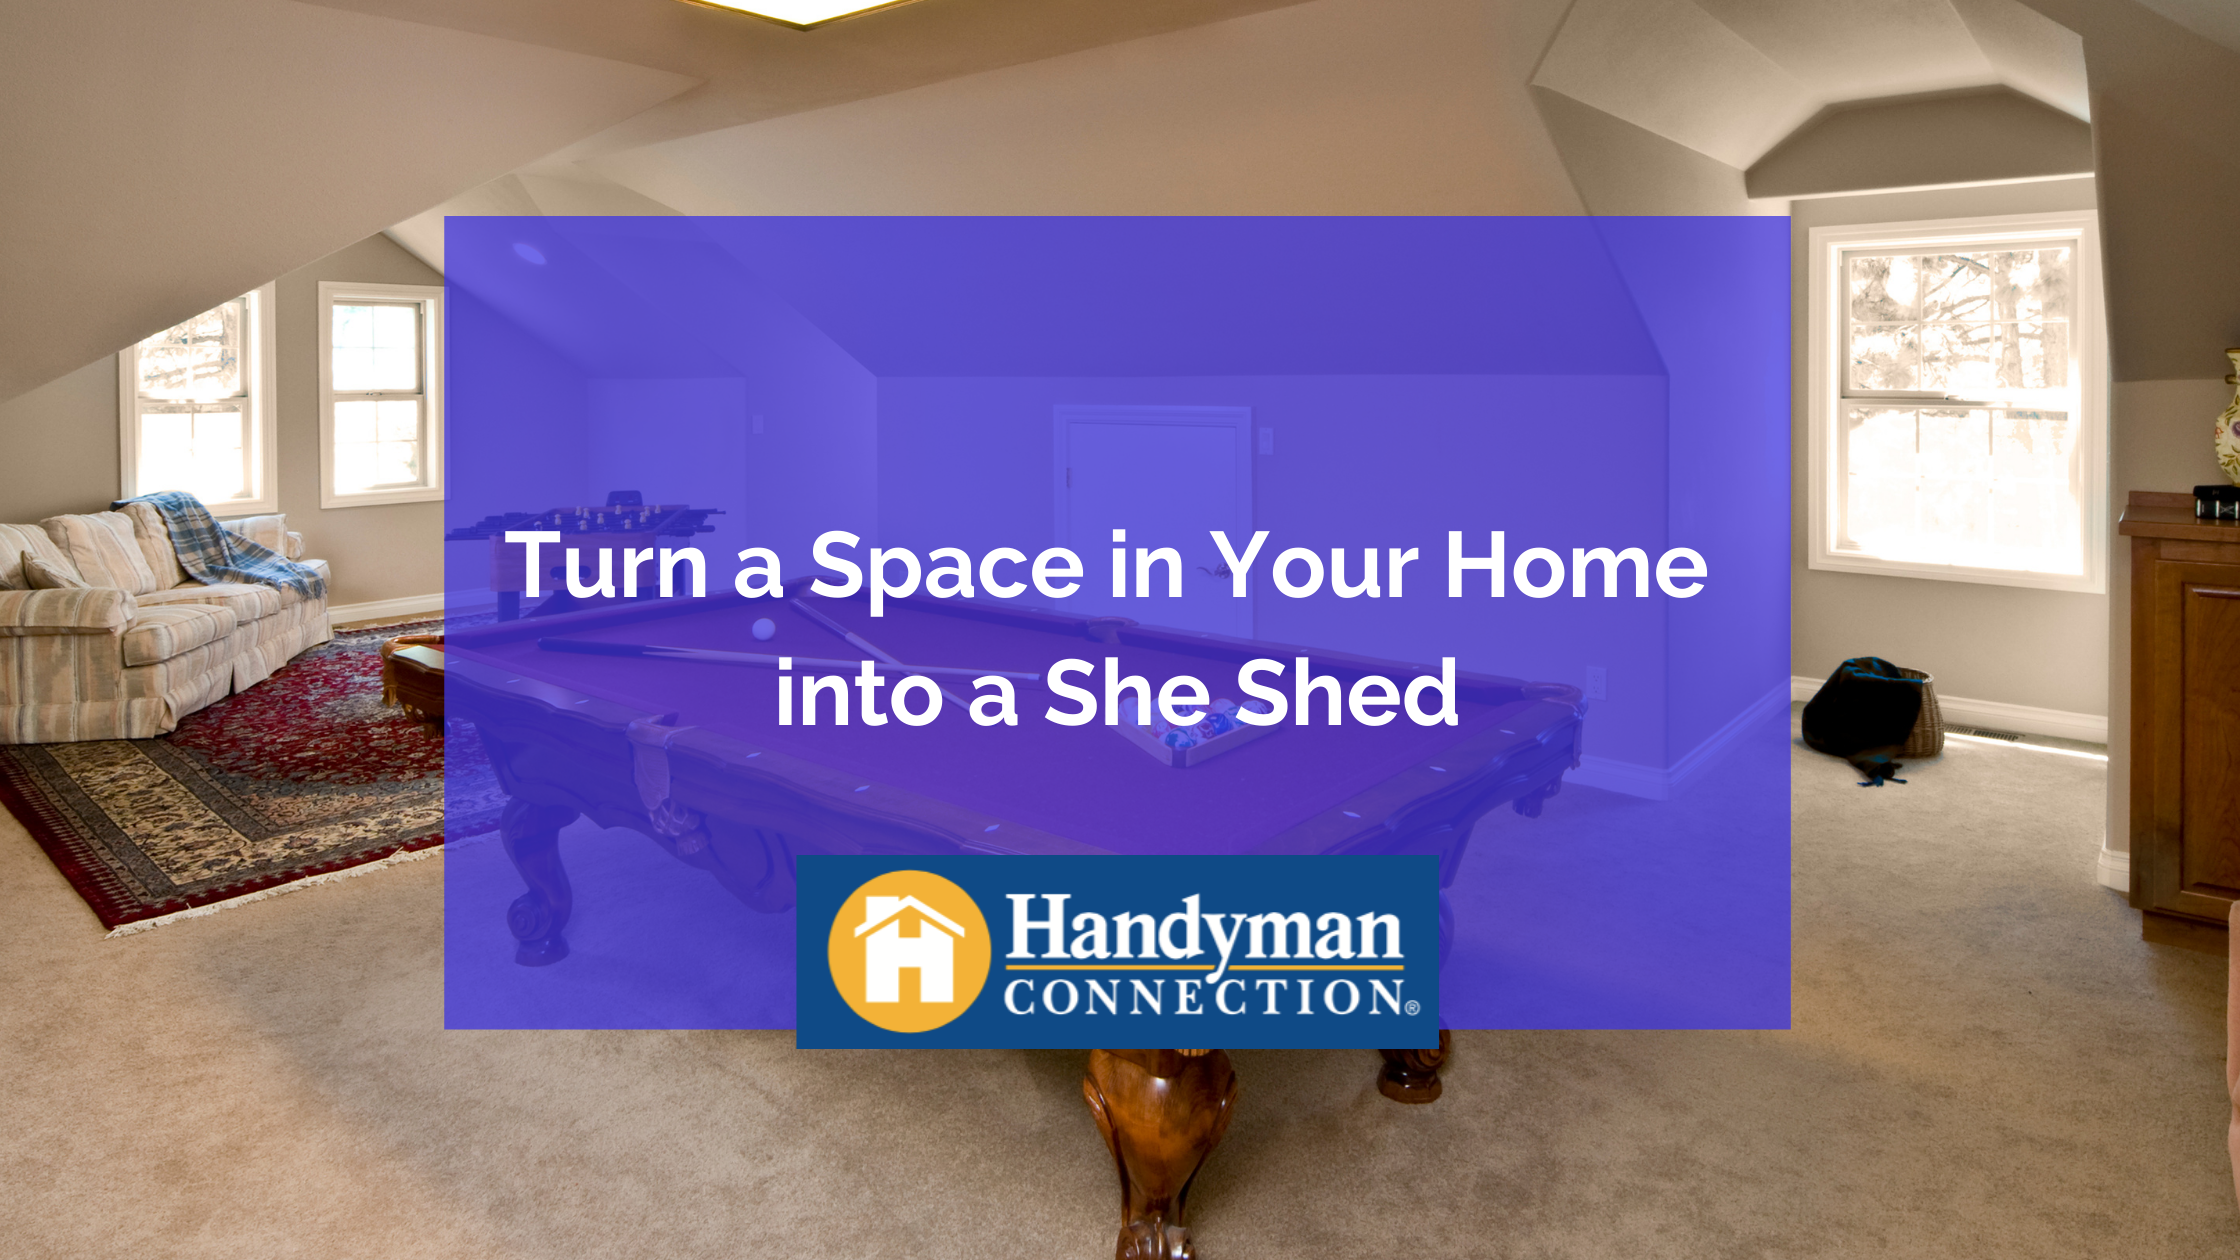 https://handymanconnection.com/wp-content/uploads/2021/05/Turn-a-Space-in-Your-Home-into-a-She-Shed.png